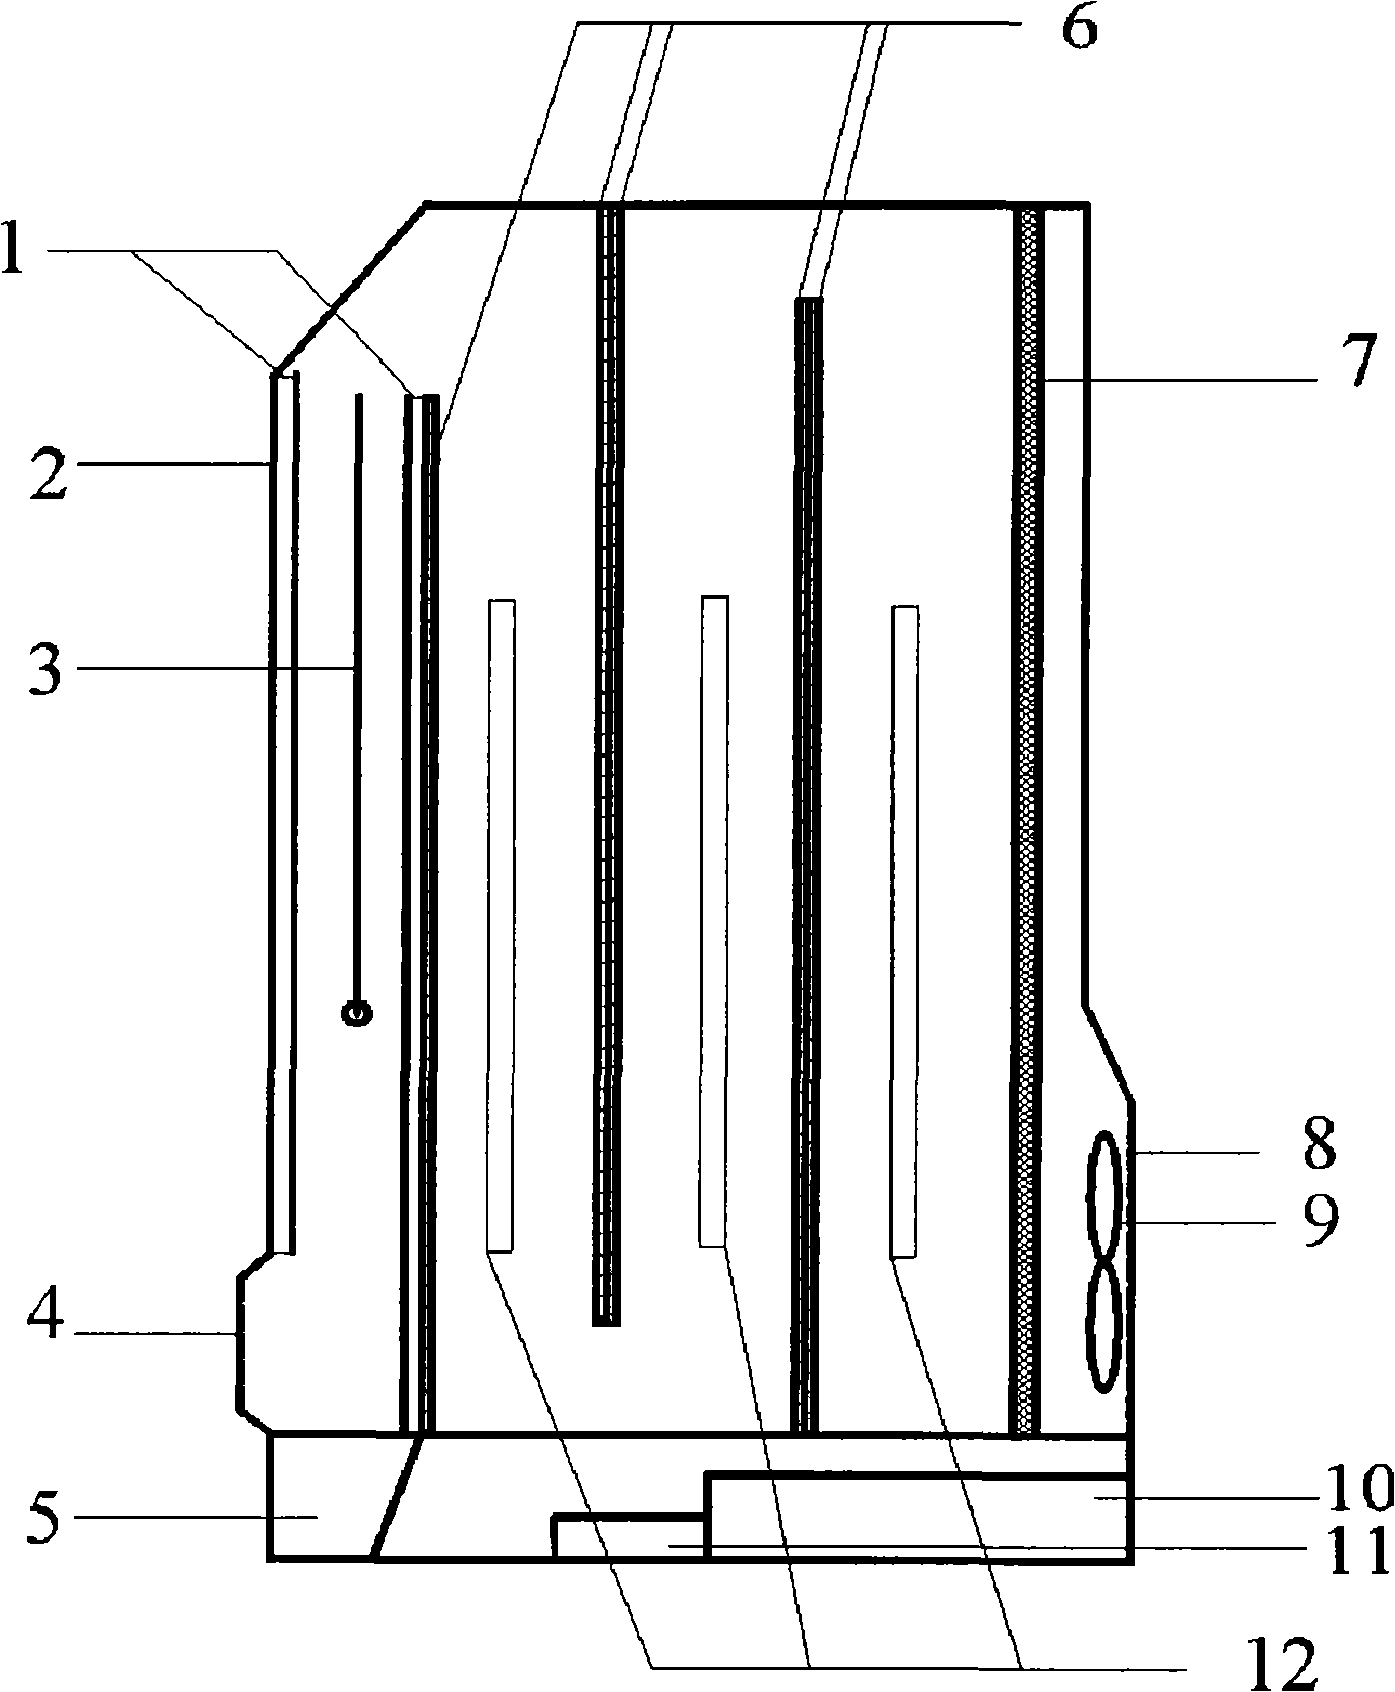 Apparatus for long-acting purifying indoor air combined pollution